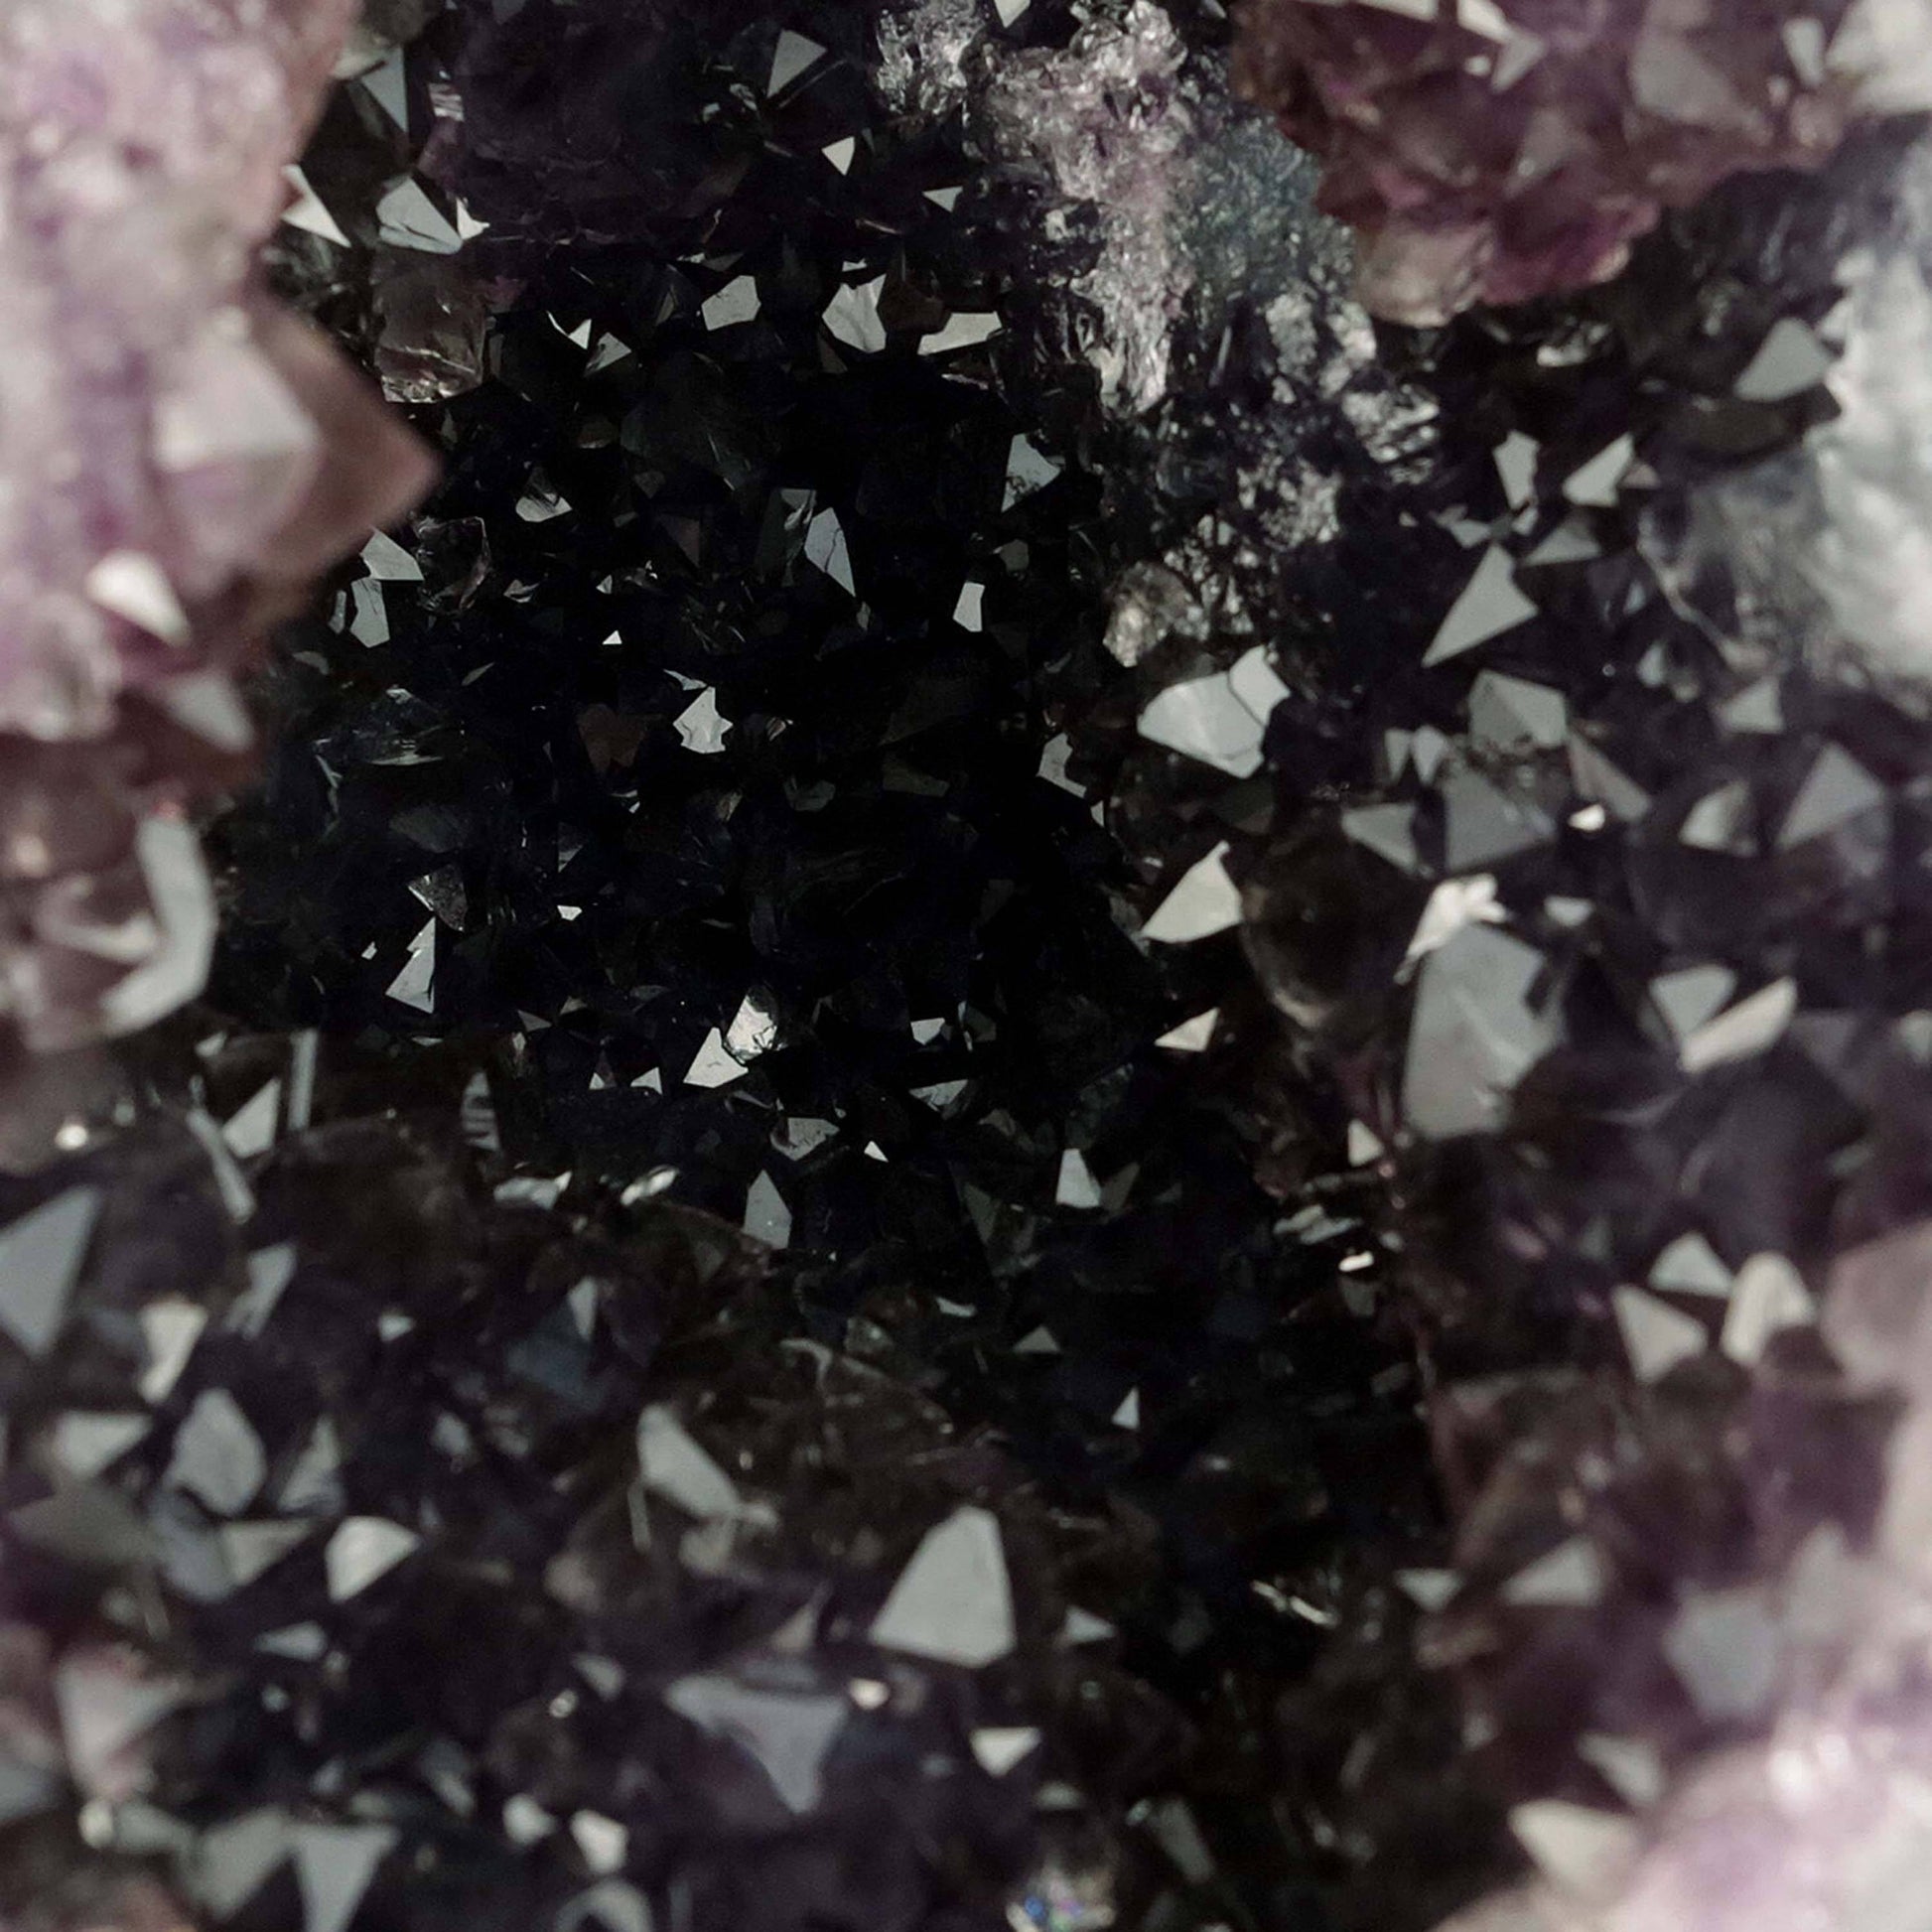 Amethyst Dark Purple Crystals Geode Natural Mineral Specimen # B 4645  https://www.superbminerals.us/products/amethyst-dark-purple-crystals-geode-natural-mineral-specimen-b-4645  Features: A Geode encrusted with beautiful, transparent Amethyst Quartz crystals in deep purple. Amethyst's vivid purple is unlike anything else on the market, and this piece is no exception. Aesthetic, with excellent colour and shine, and at a great price. It is in good shape. Primary Mineral(s): Amethyst